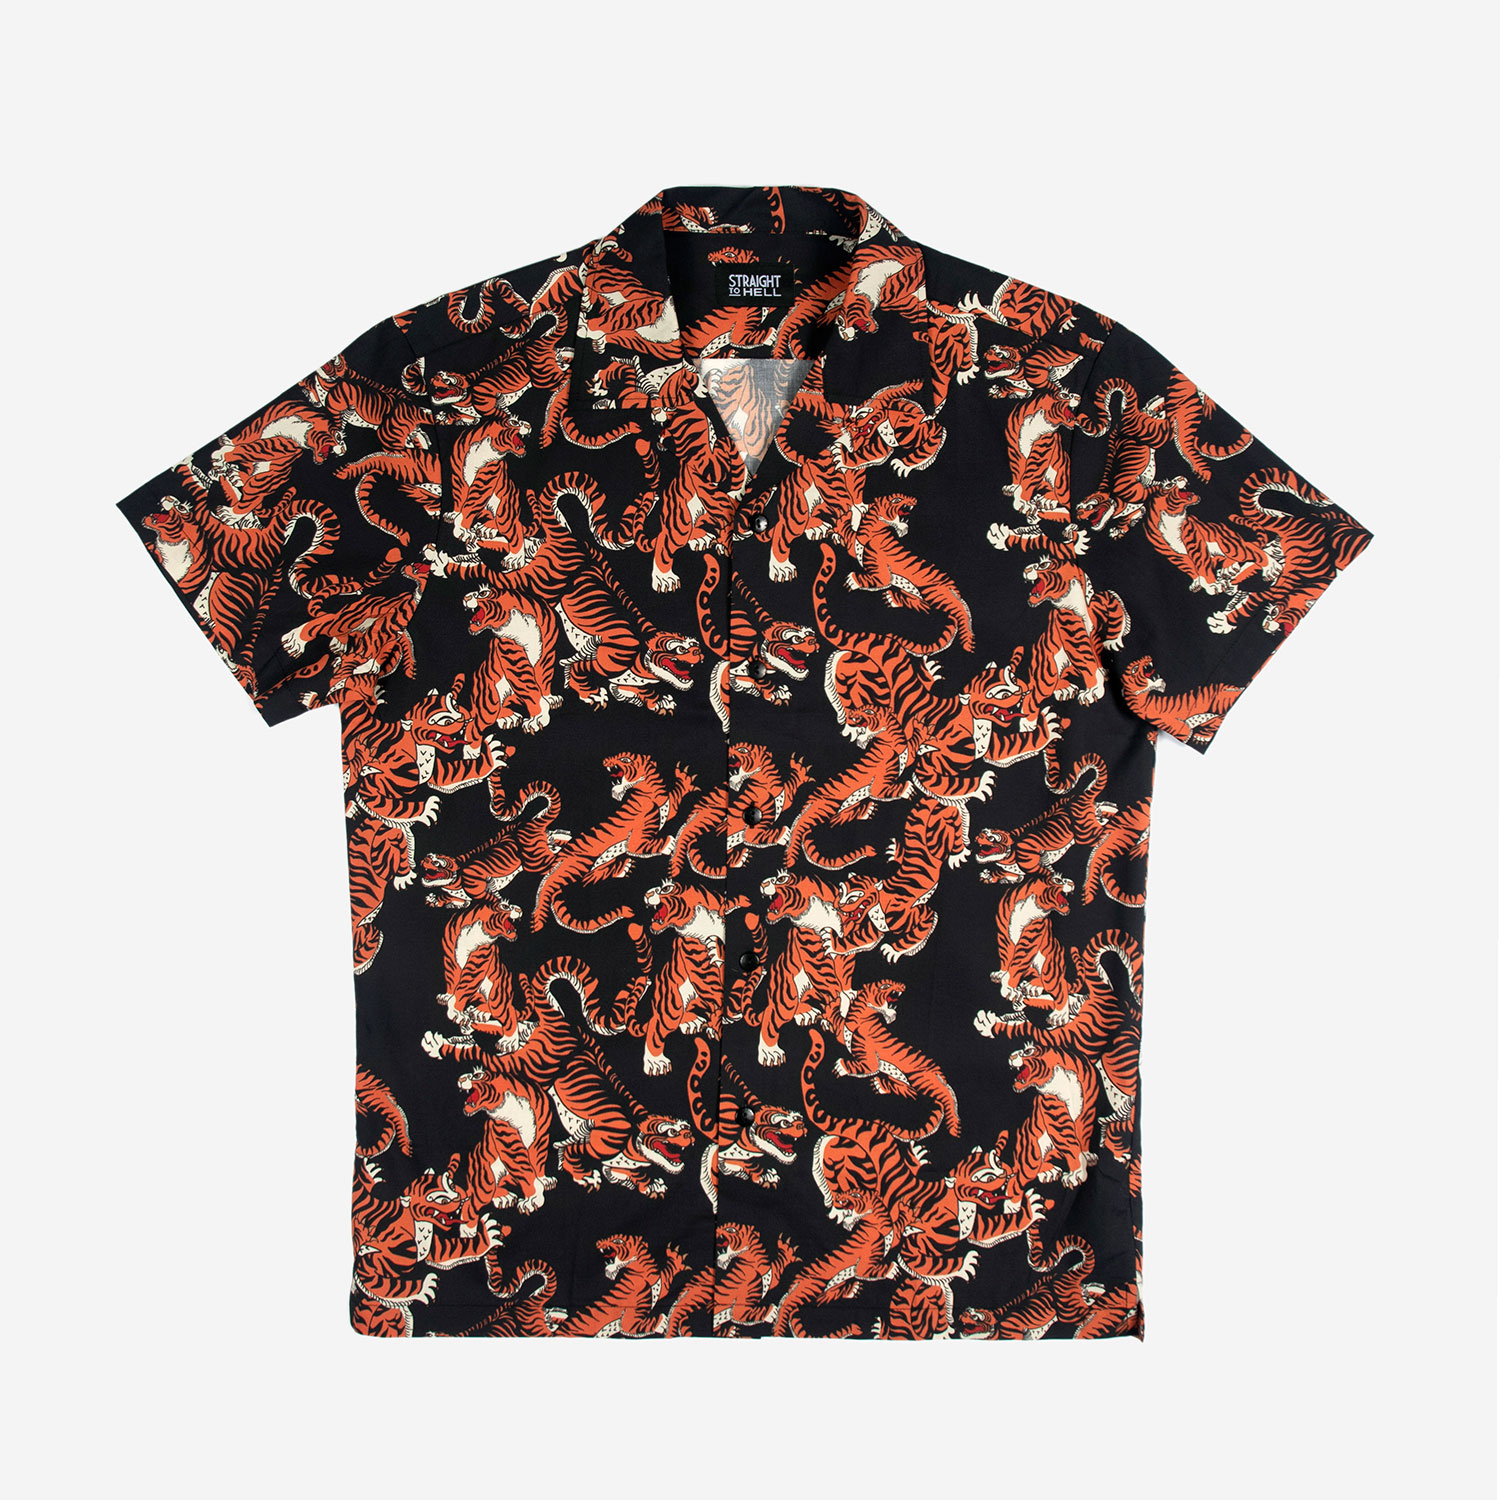 Tame My Tiger - Tiger Motif Print Shirt (Size XS, M) - Men's by Straight to Hell